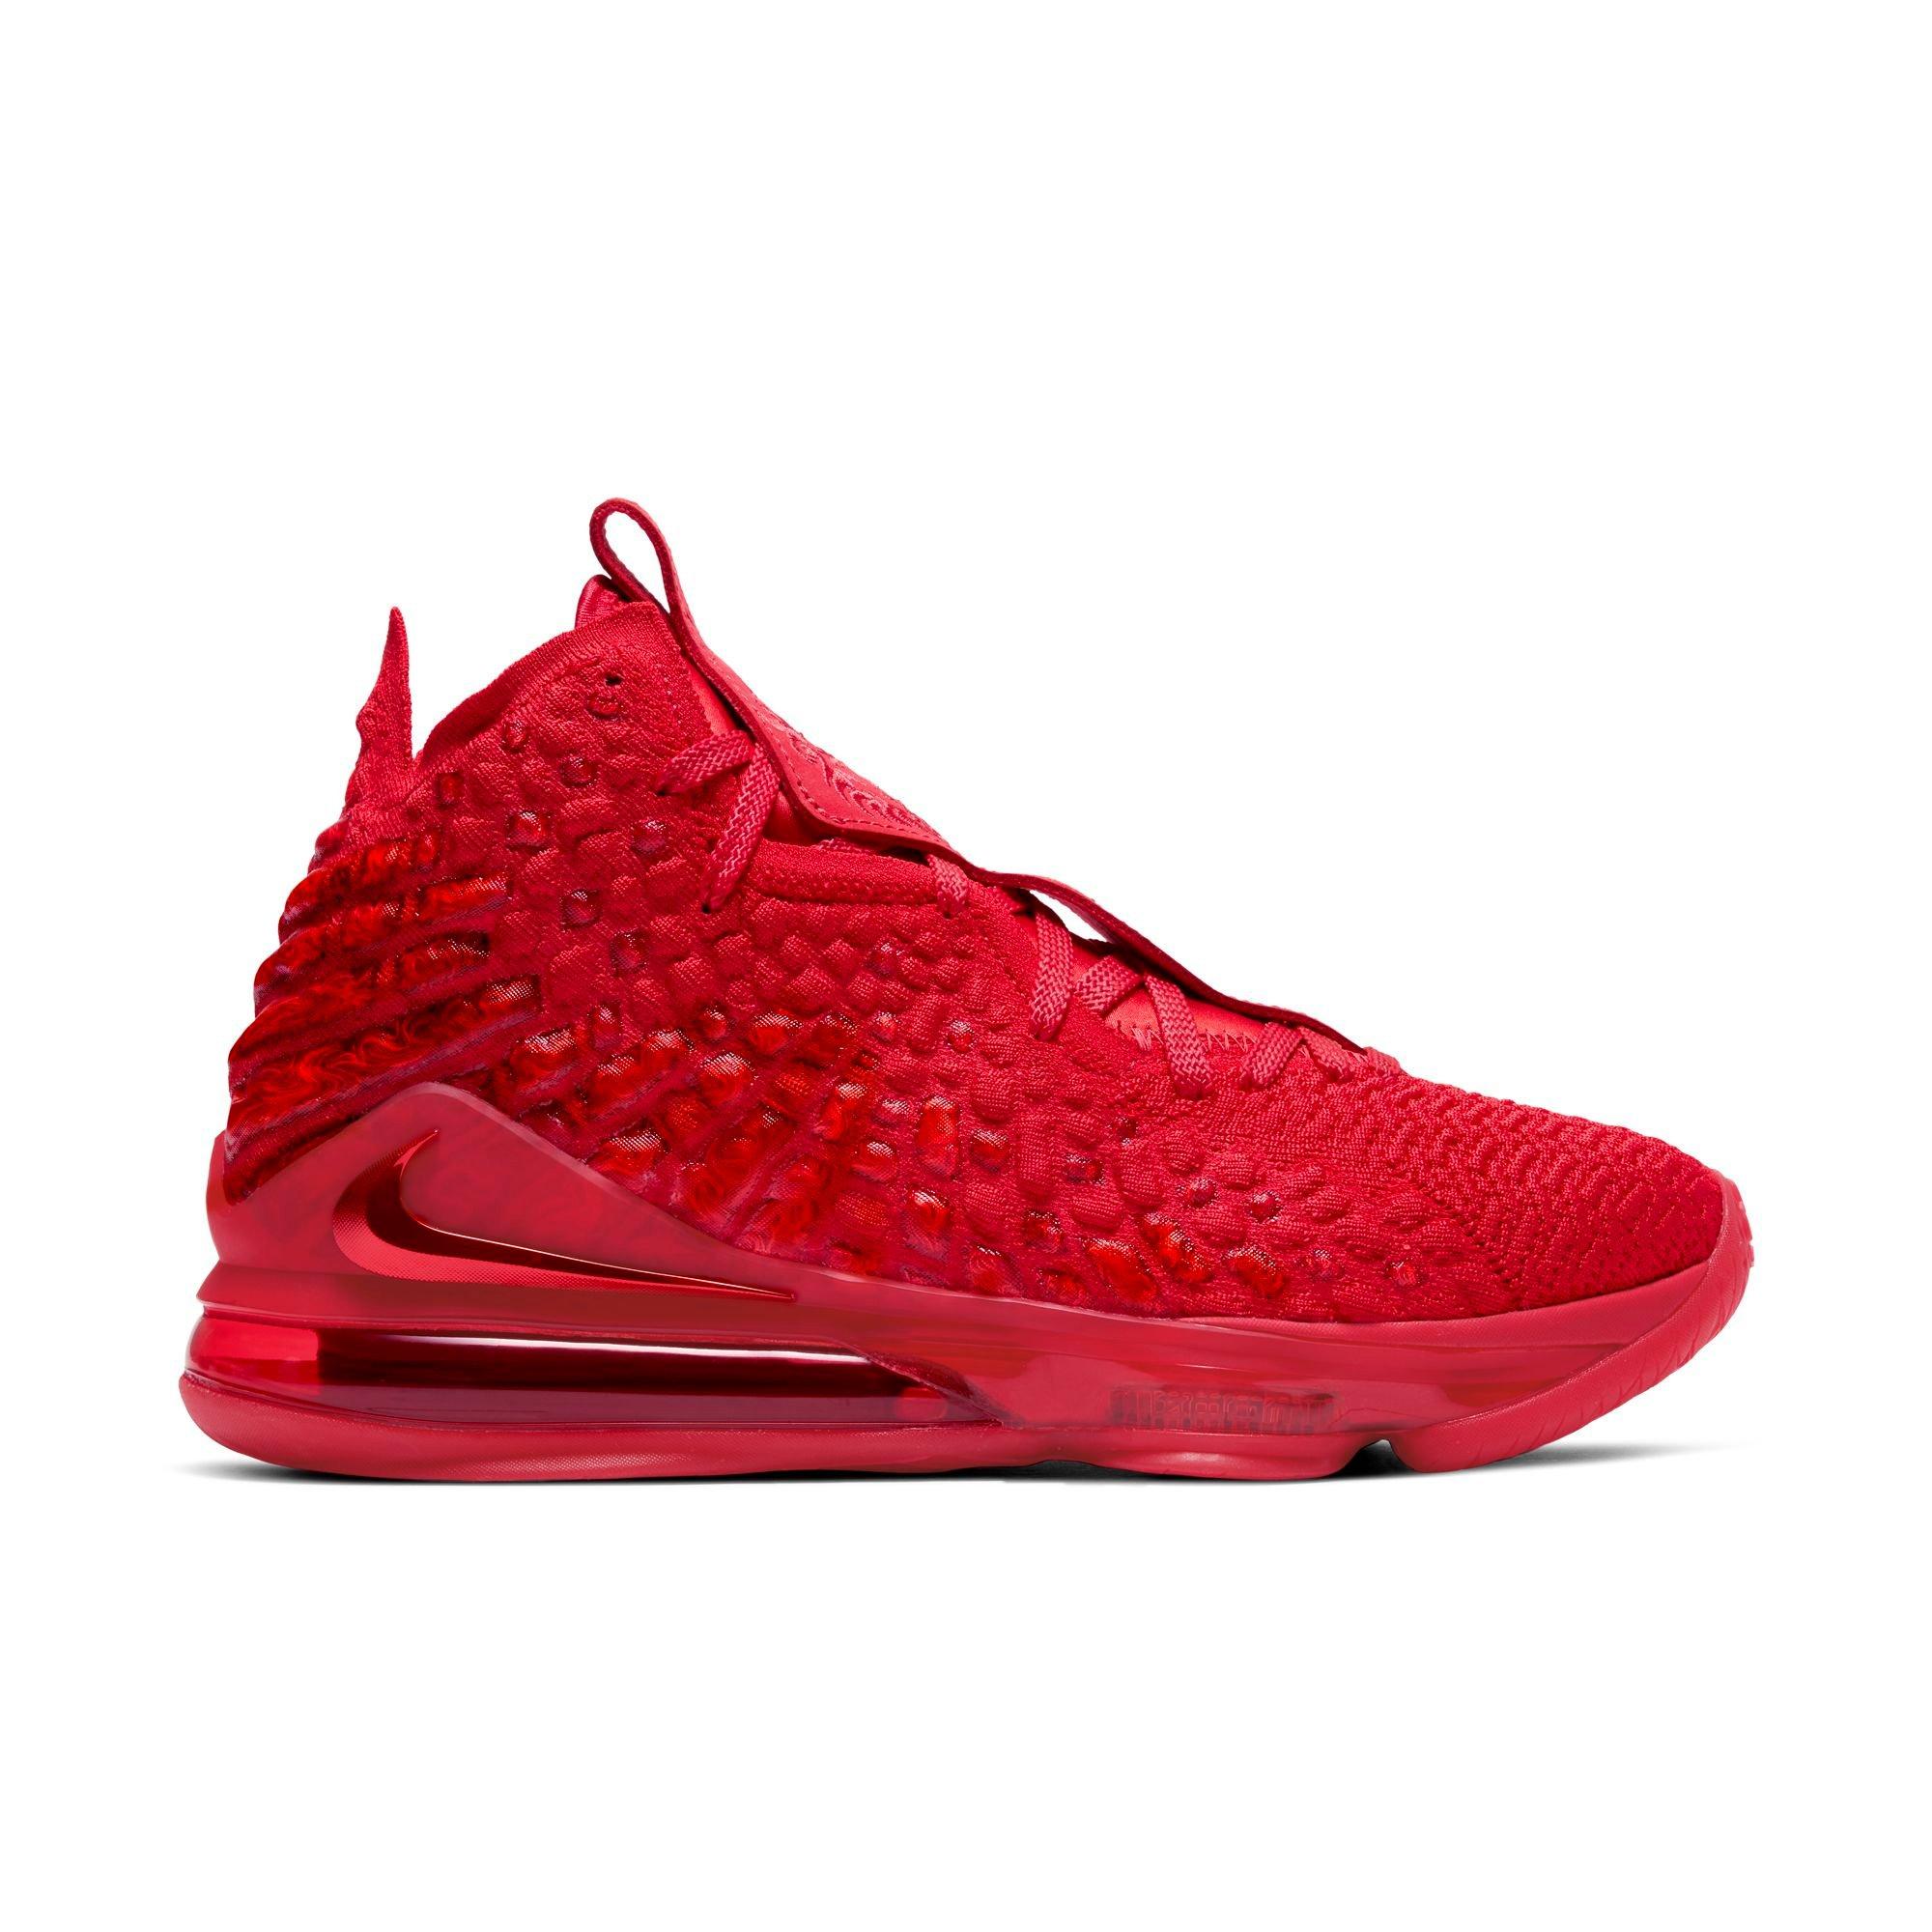 lebron james 17 shoes red